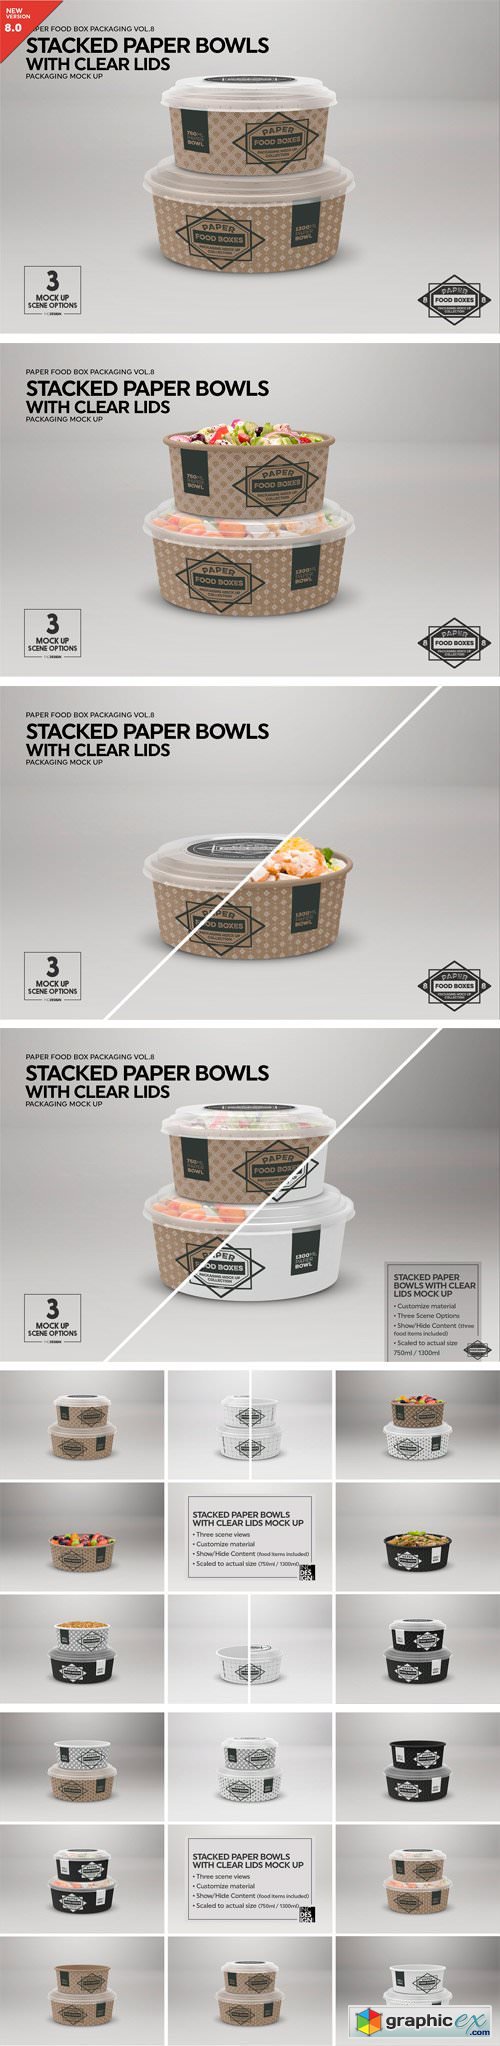 Stacked Paper Bowls Mock Up